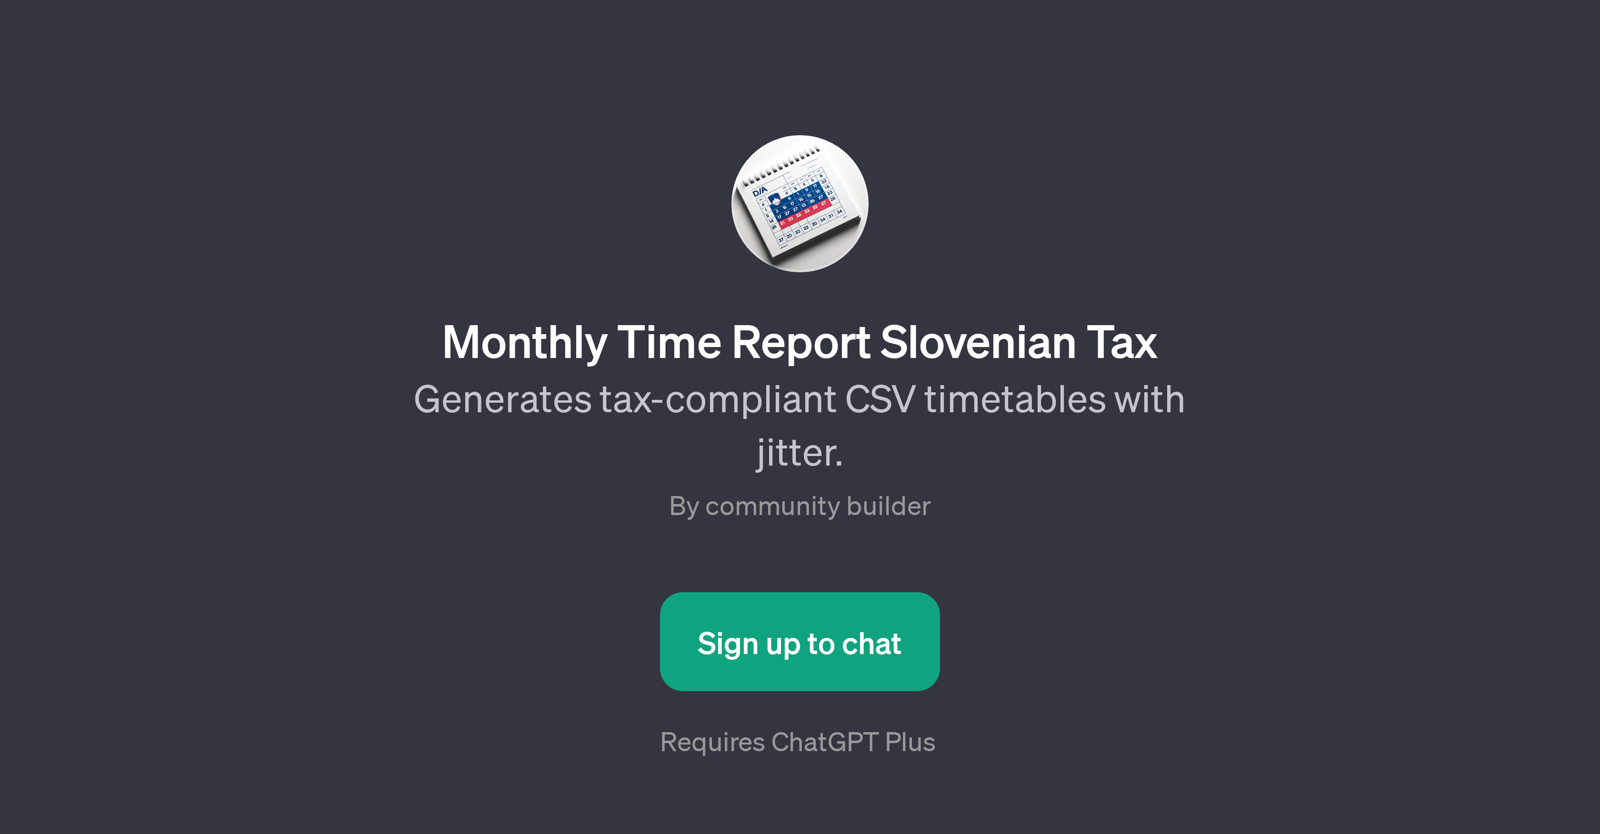 Monthly Time Report Slovenian Tax website